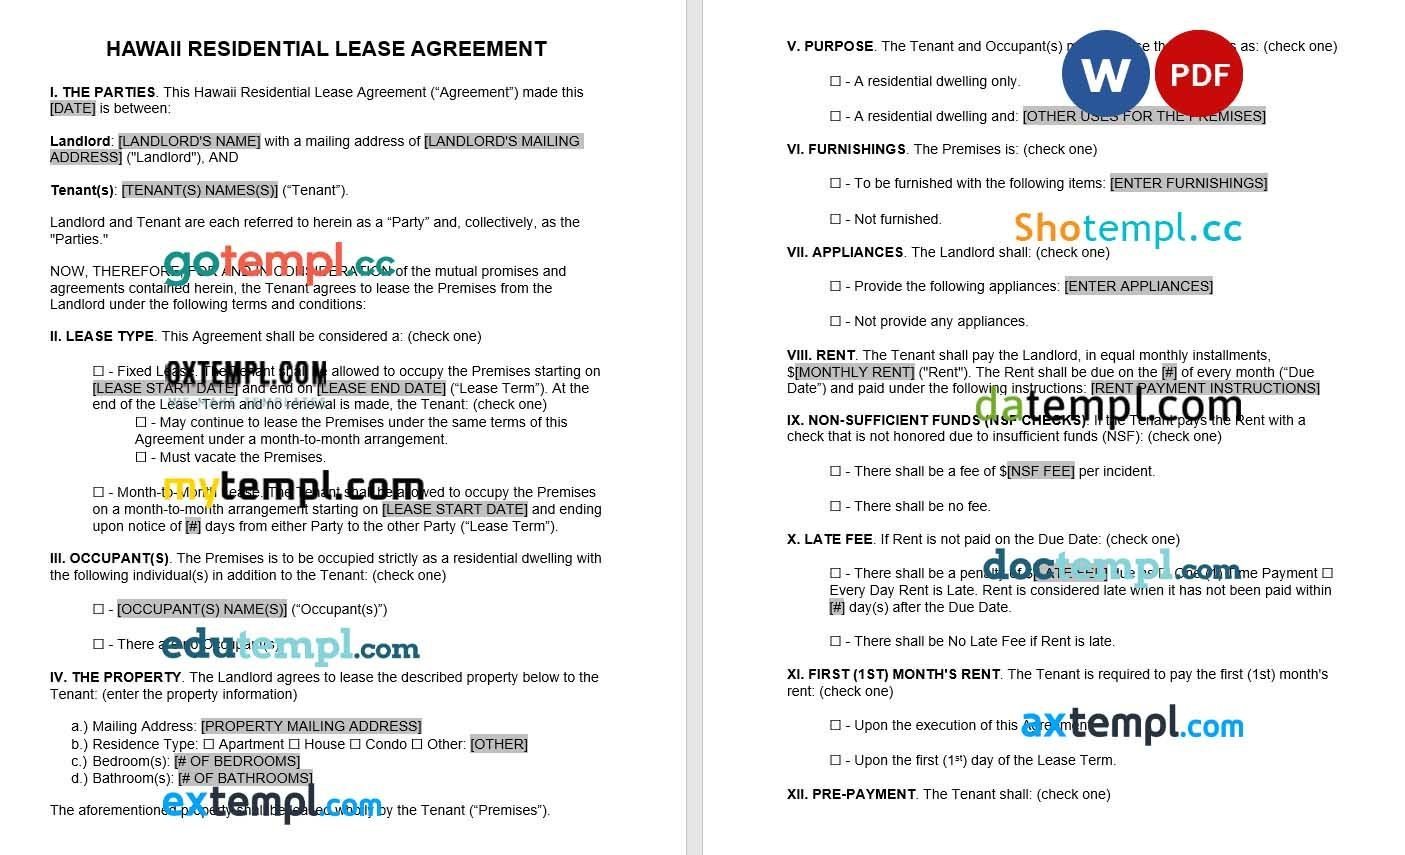 Hawaii Standard Residential Lease Agreement Word example, completely editable